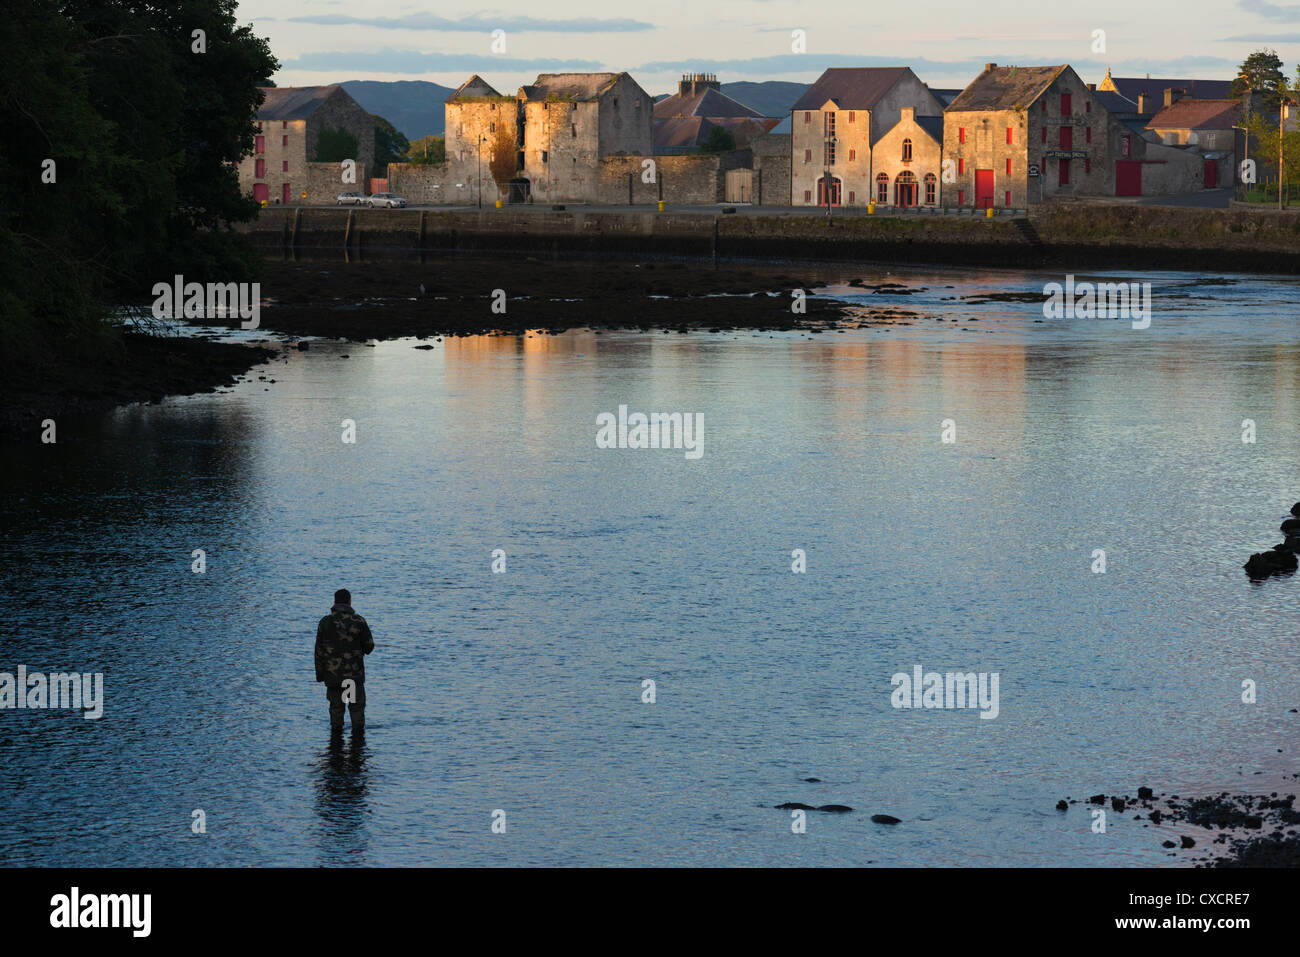 Man fishing with view of warehouses on the waterfront, Ramelton, County Donegal, Ulster Province, Republic of Ireland. Stock Photo